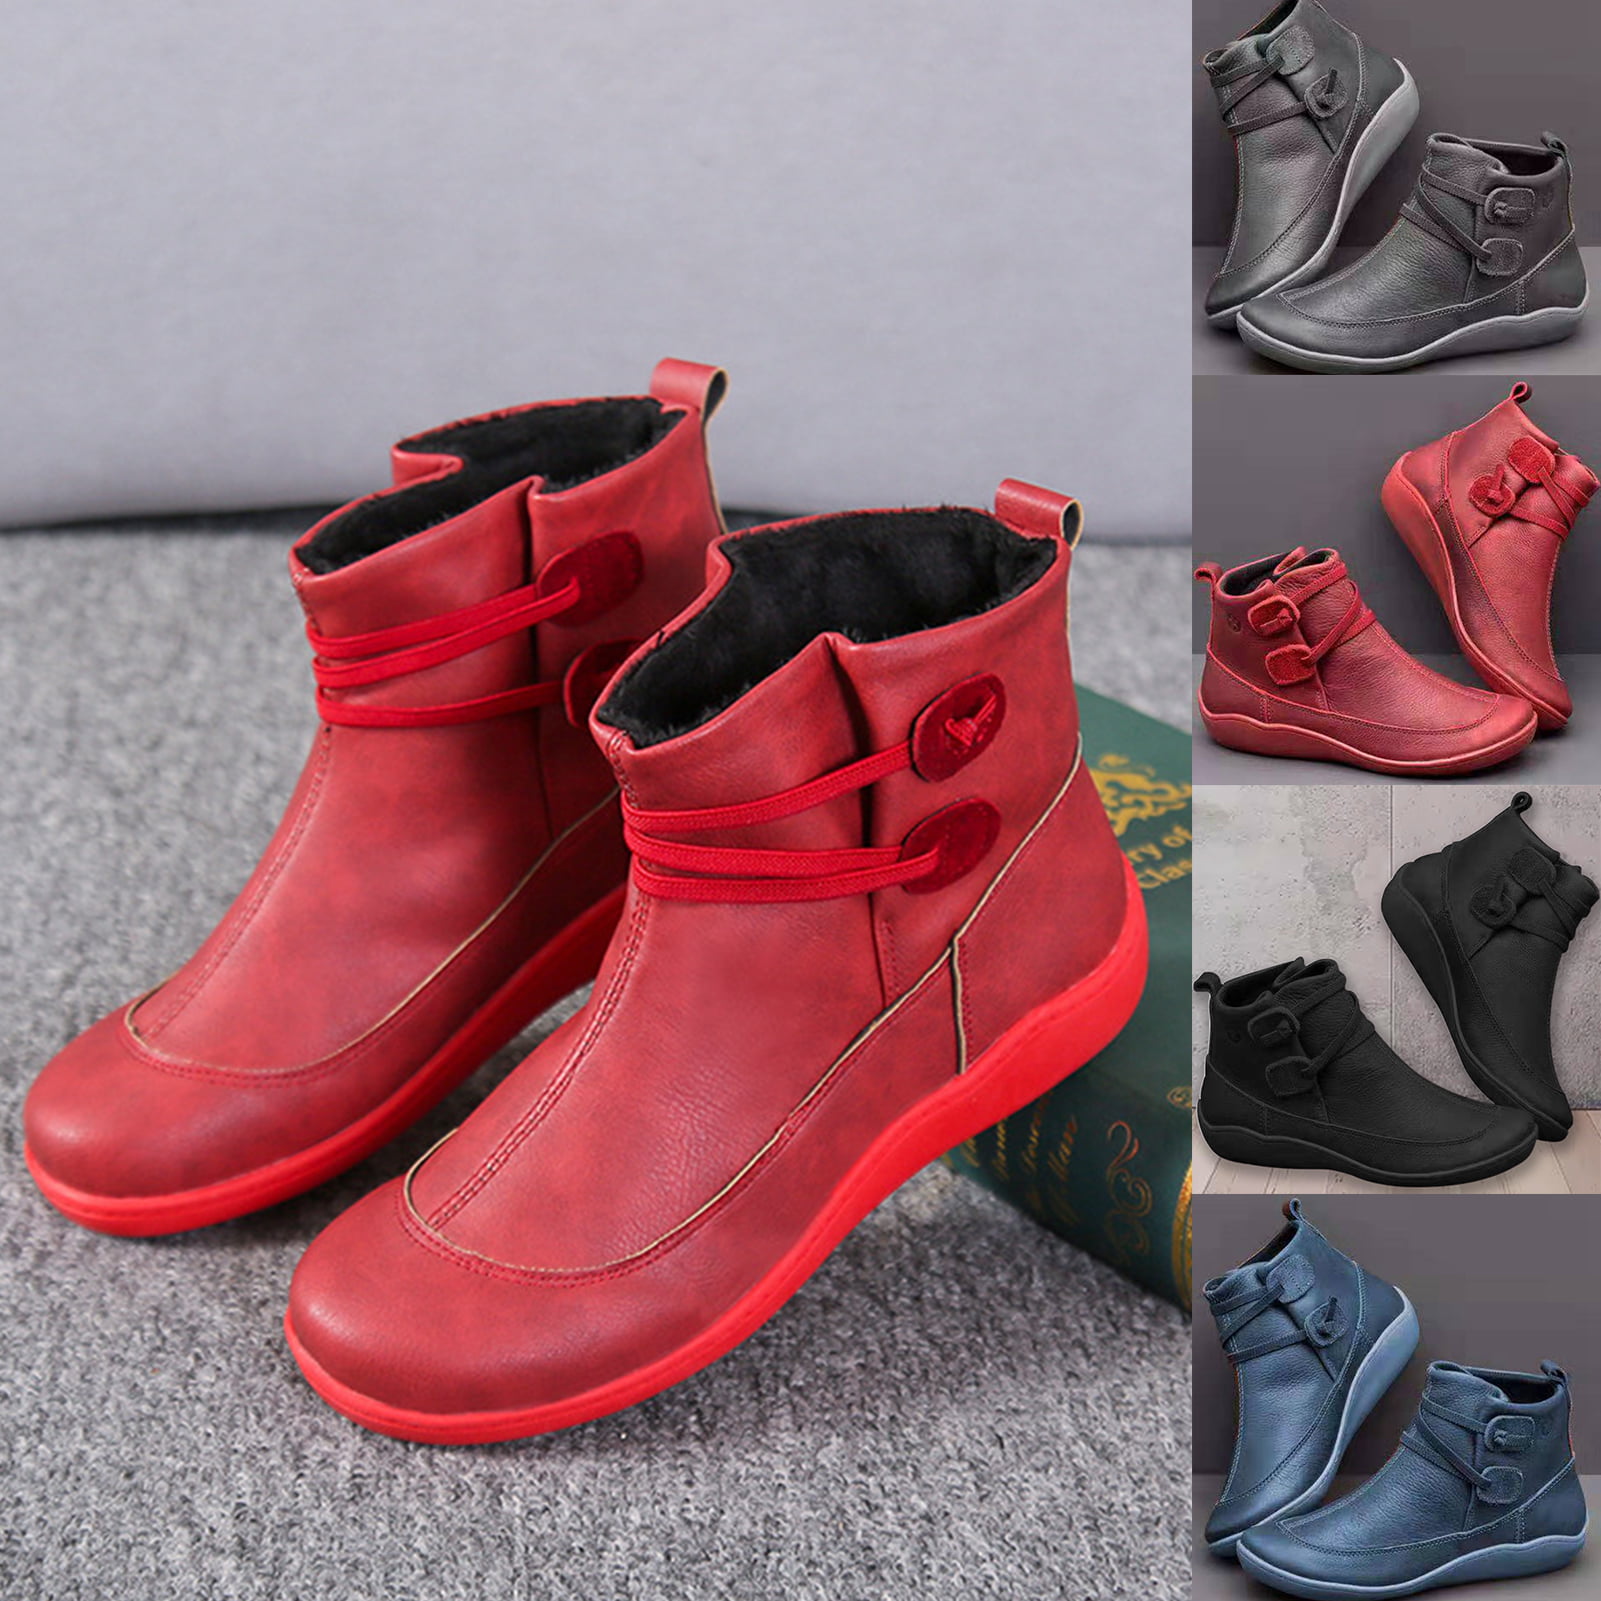 Buildtough New and Imported Square Heel Ankle Boots for Women Red :  Amazon.in: Shoes & Handbags